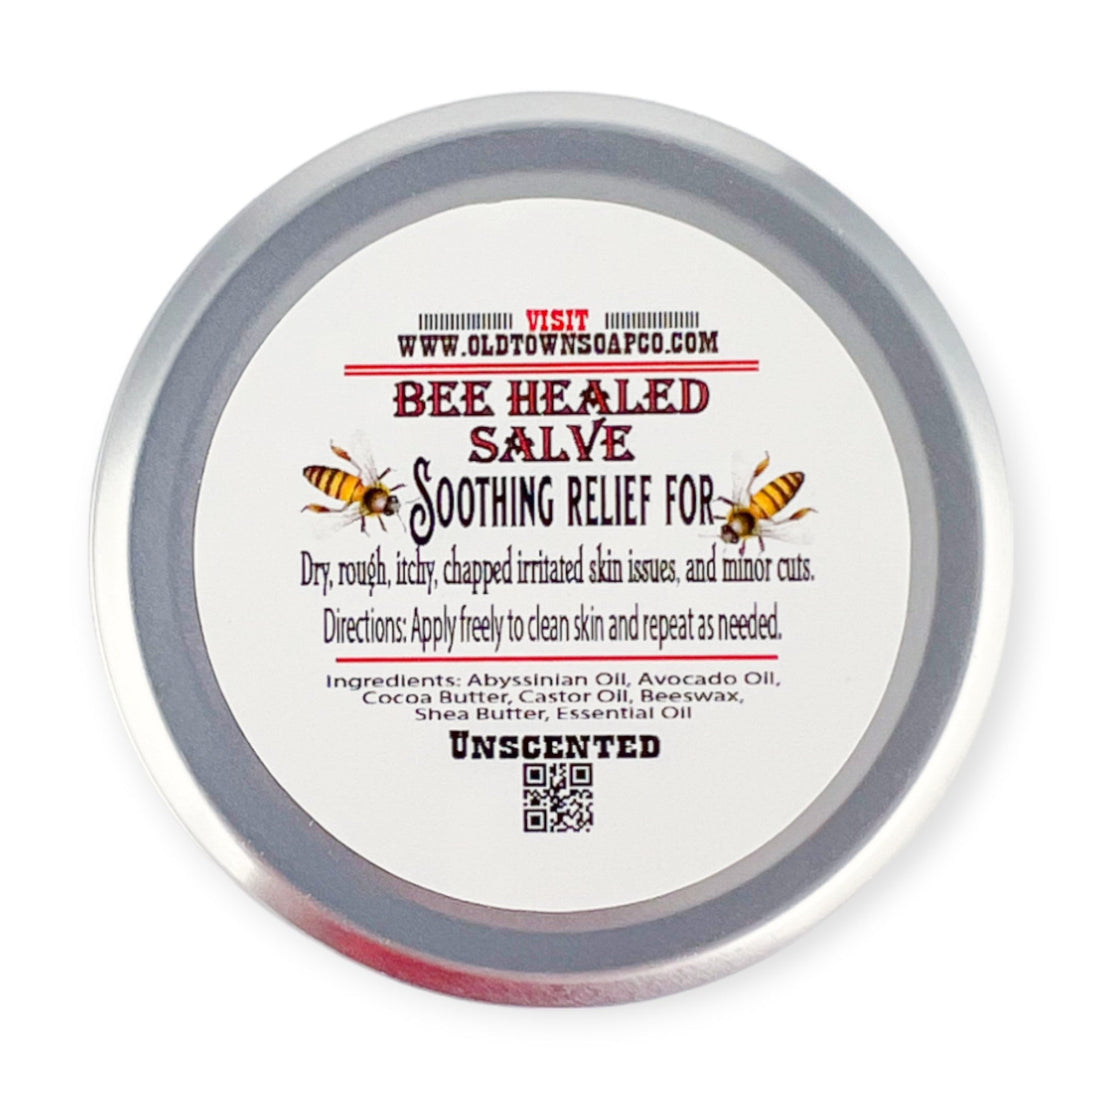 Unscented Bee Healed Salve - Old Town Soap Co.